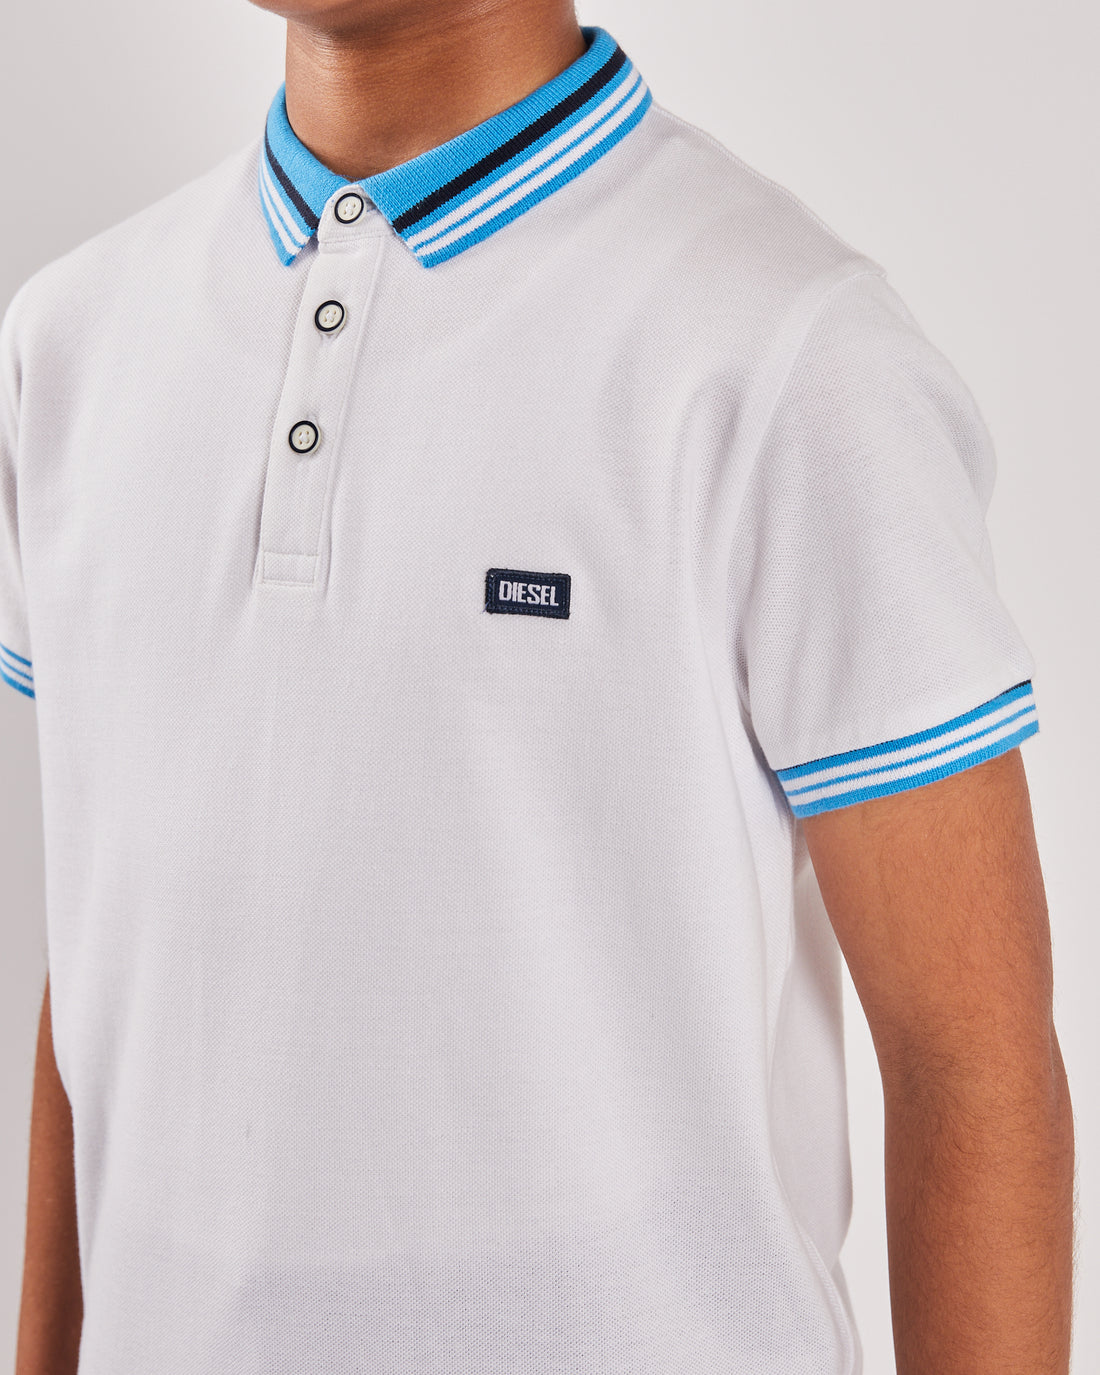 Boy's Cooper White Polo-Closer View of Front